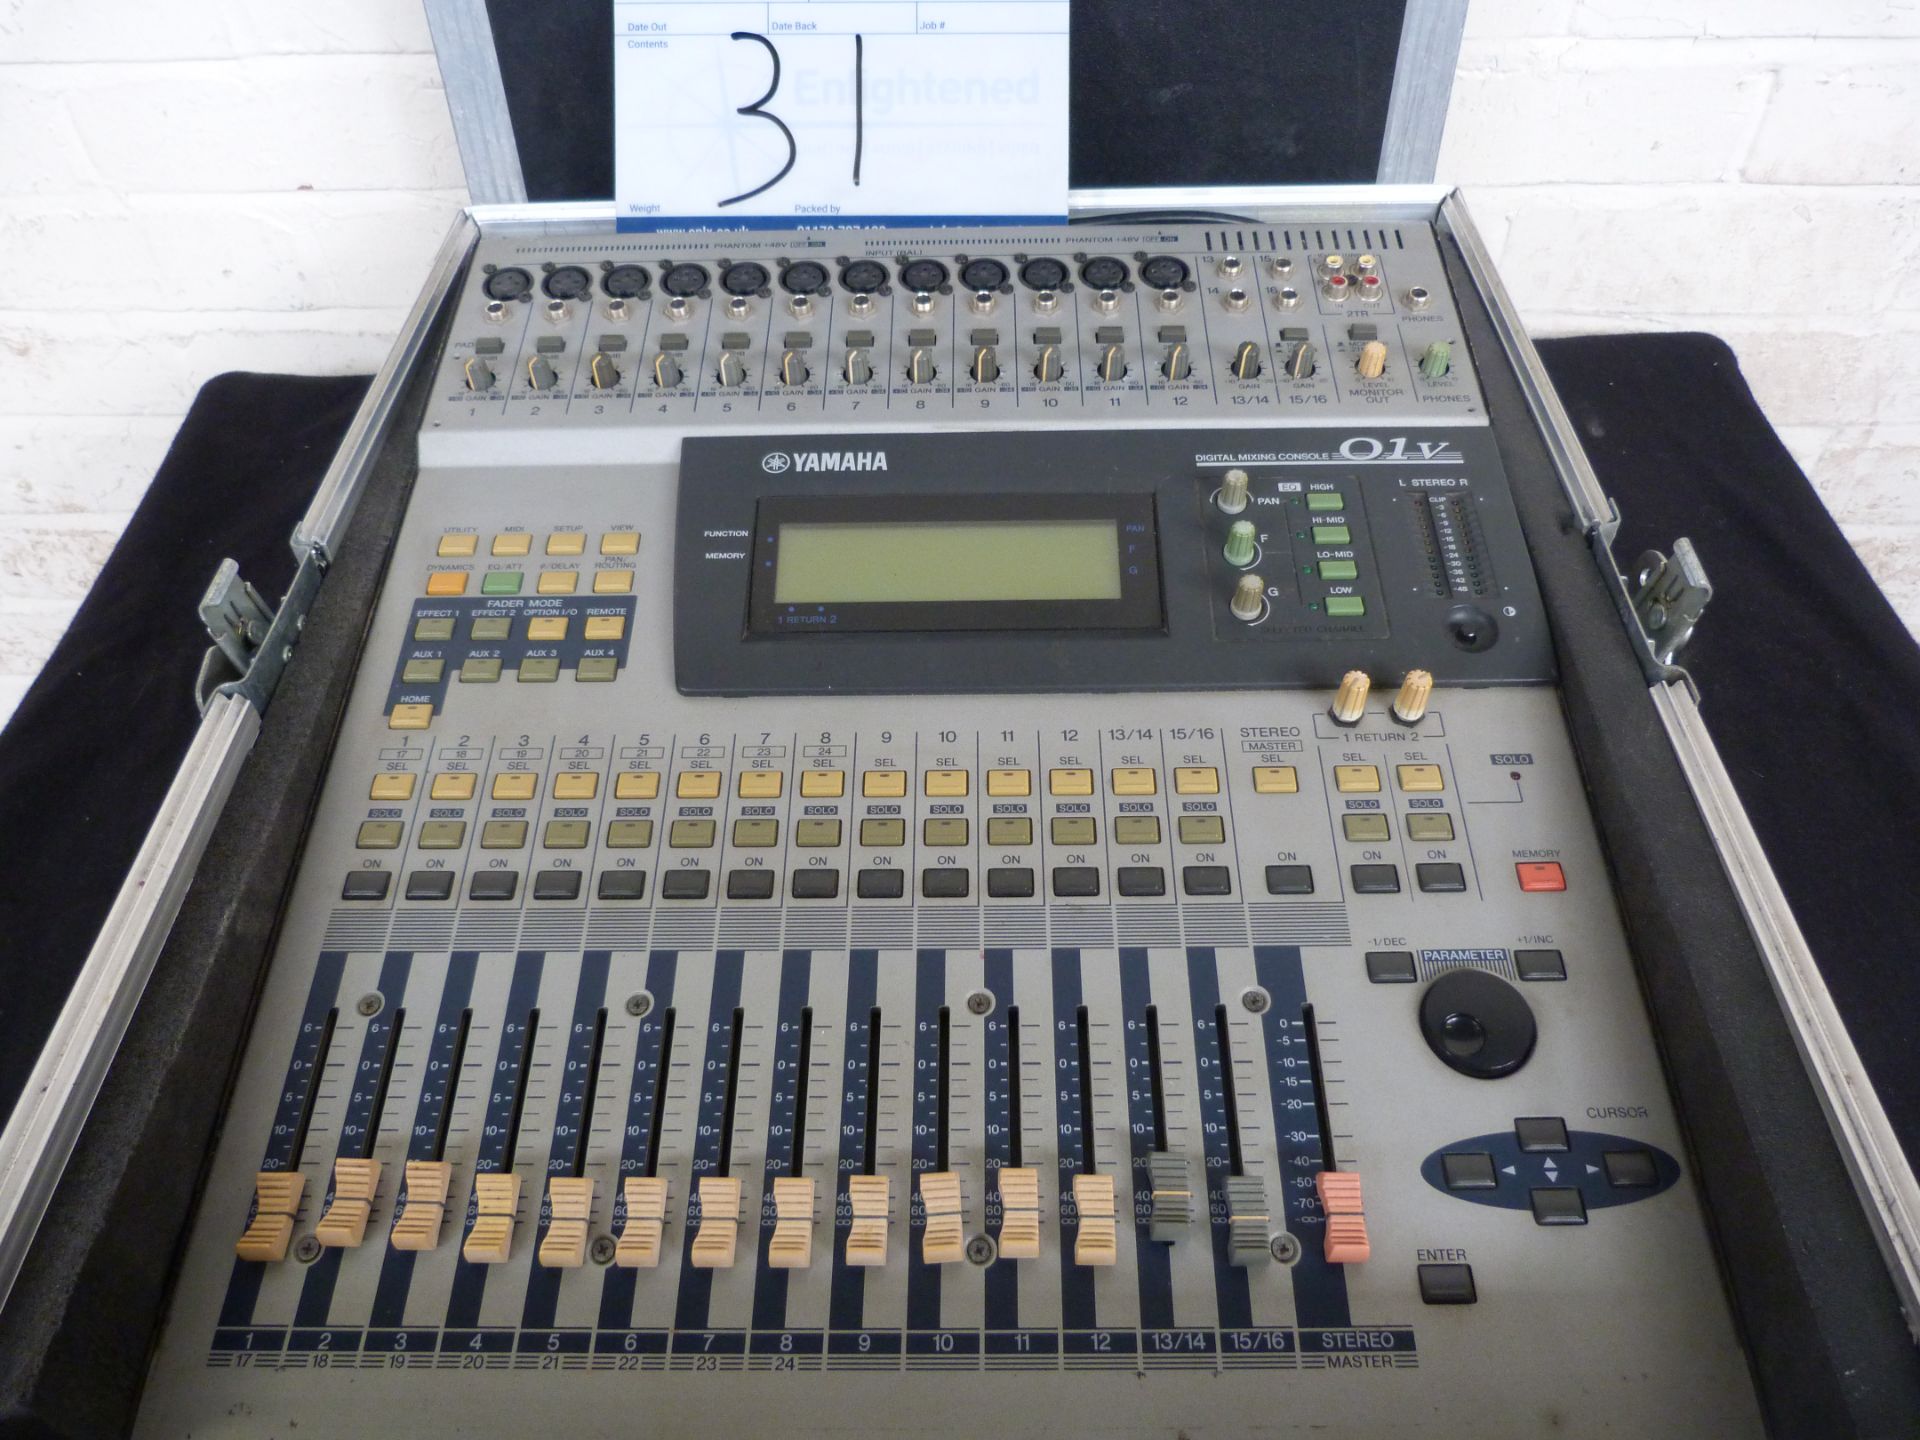 Yamaha 01V Digital Mixing Console With MY4-DA Analog Output Expansion Card, Cased. Used Second